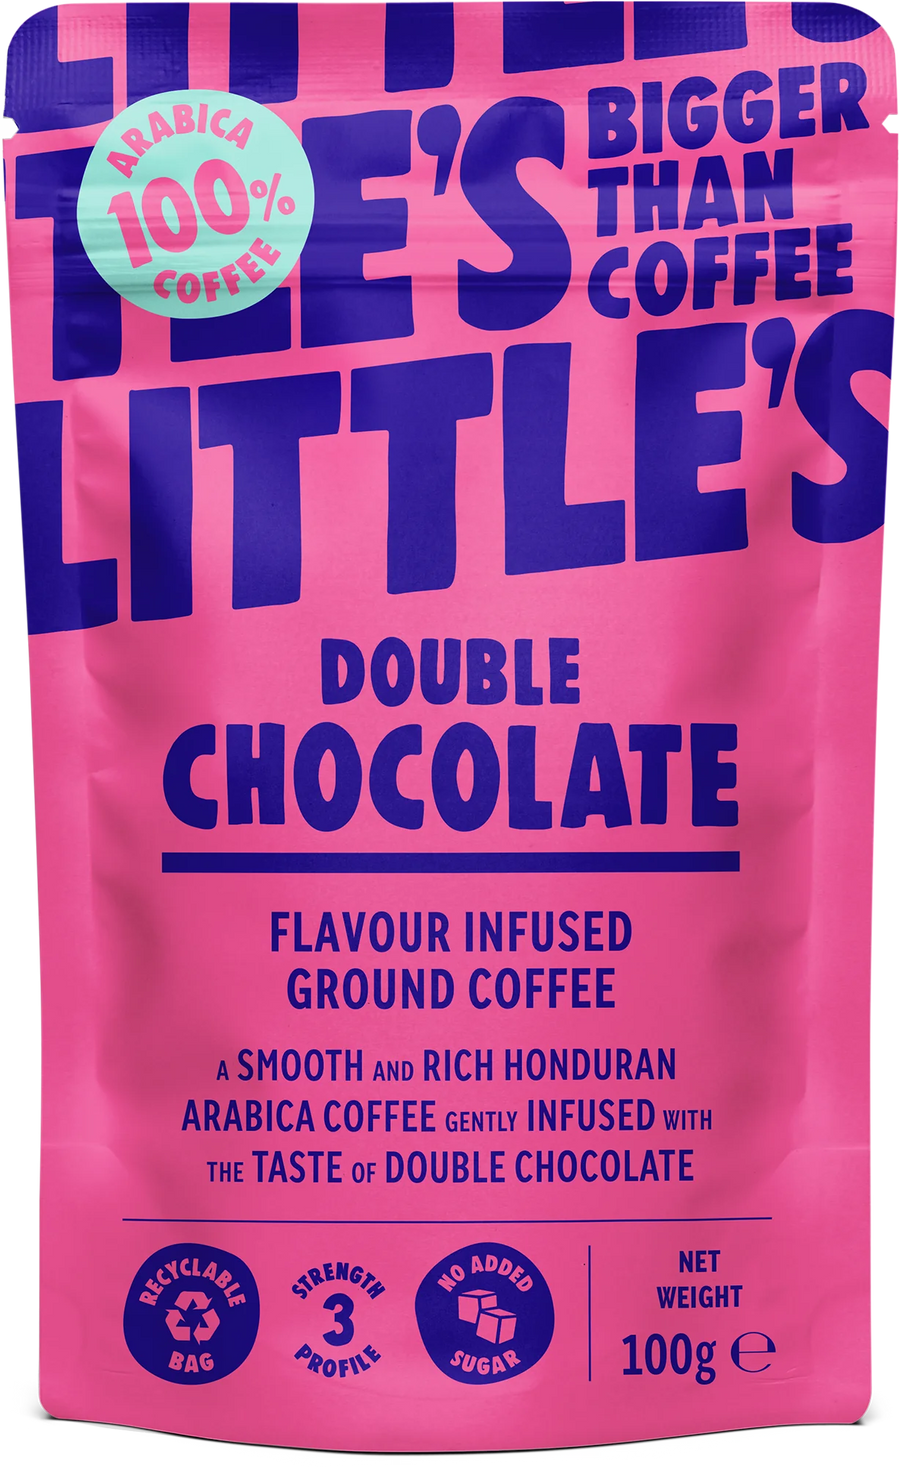 Little’s Double Chocolate Flavoured Ground Coffee